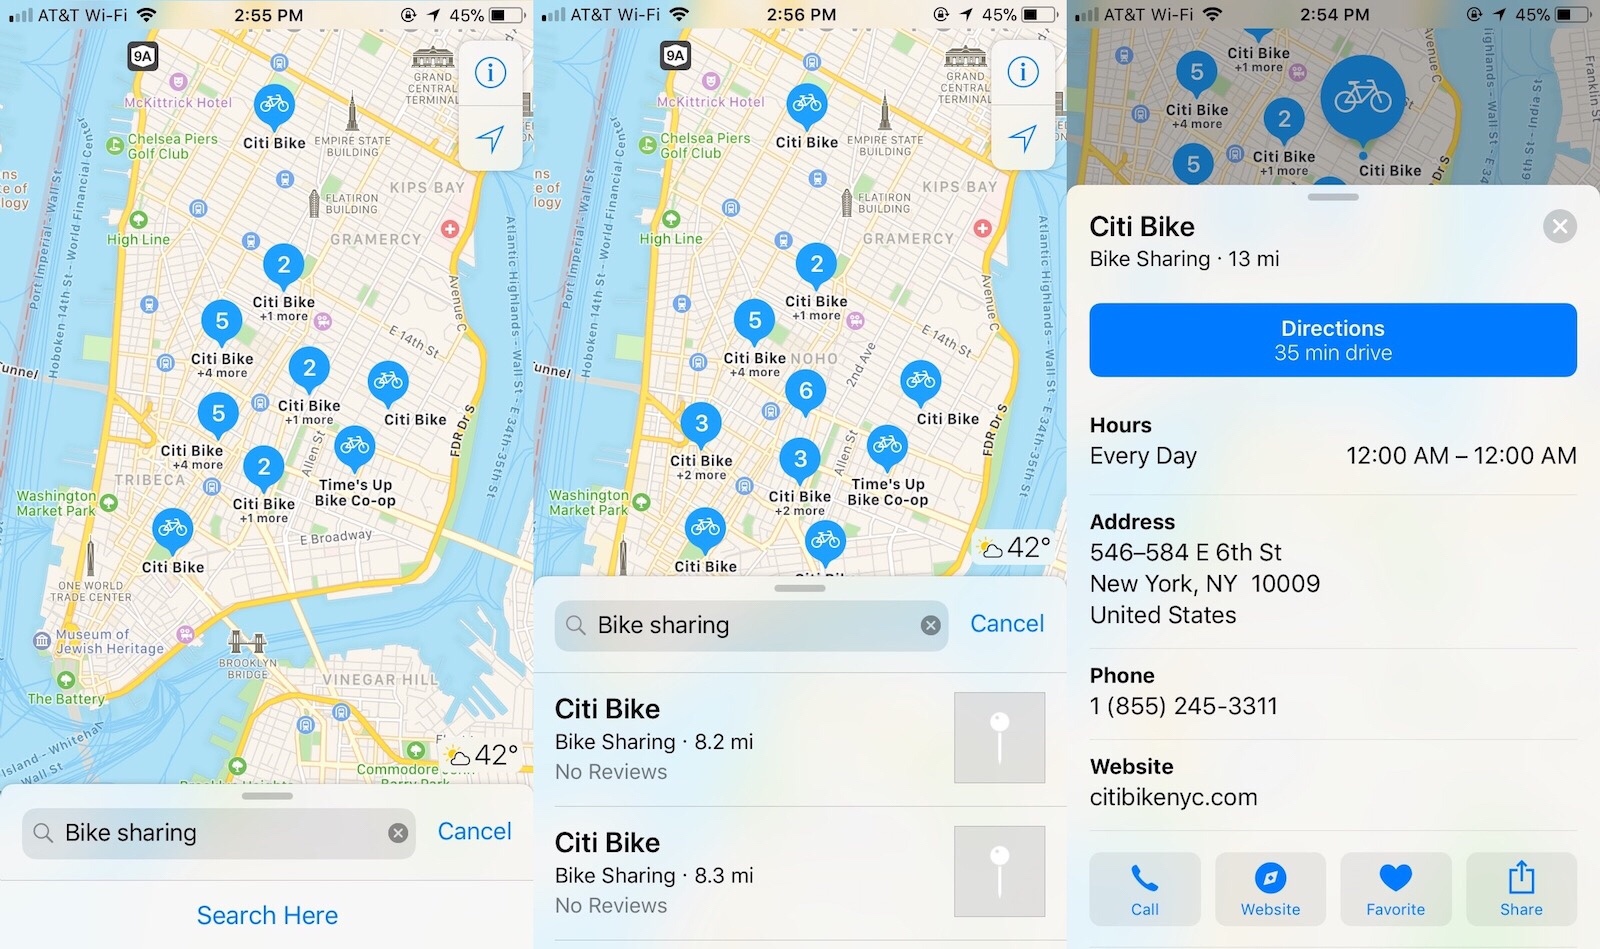 You can now find bike-sharing locations in 179 cities on Apple Maps